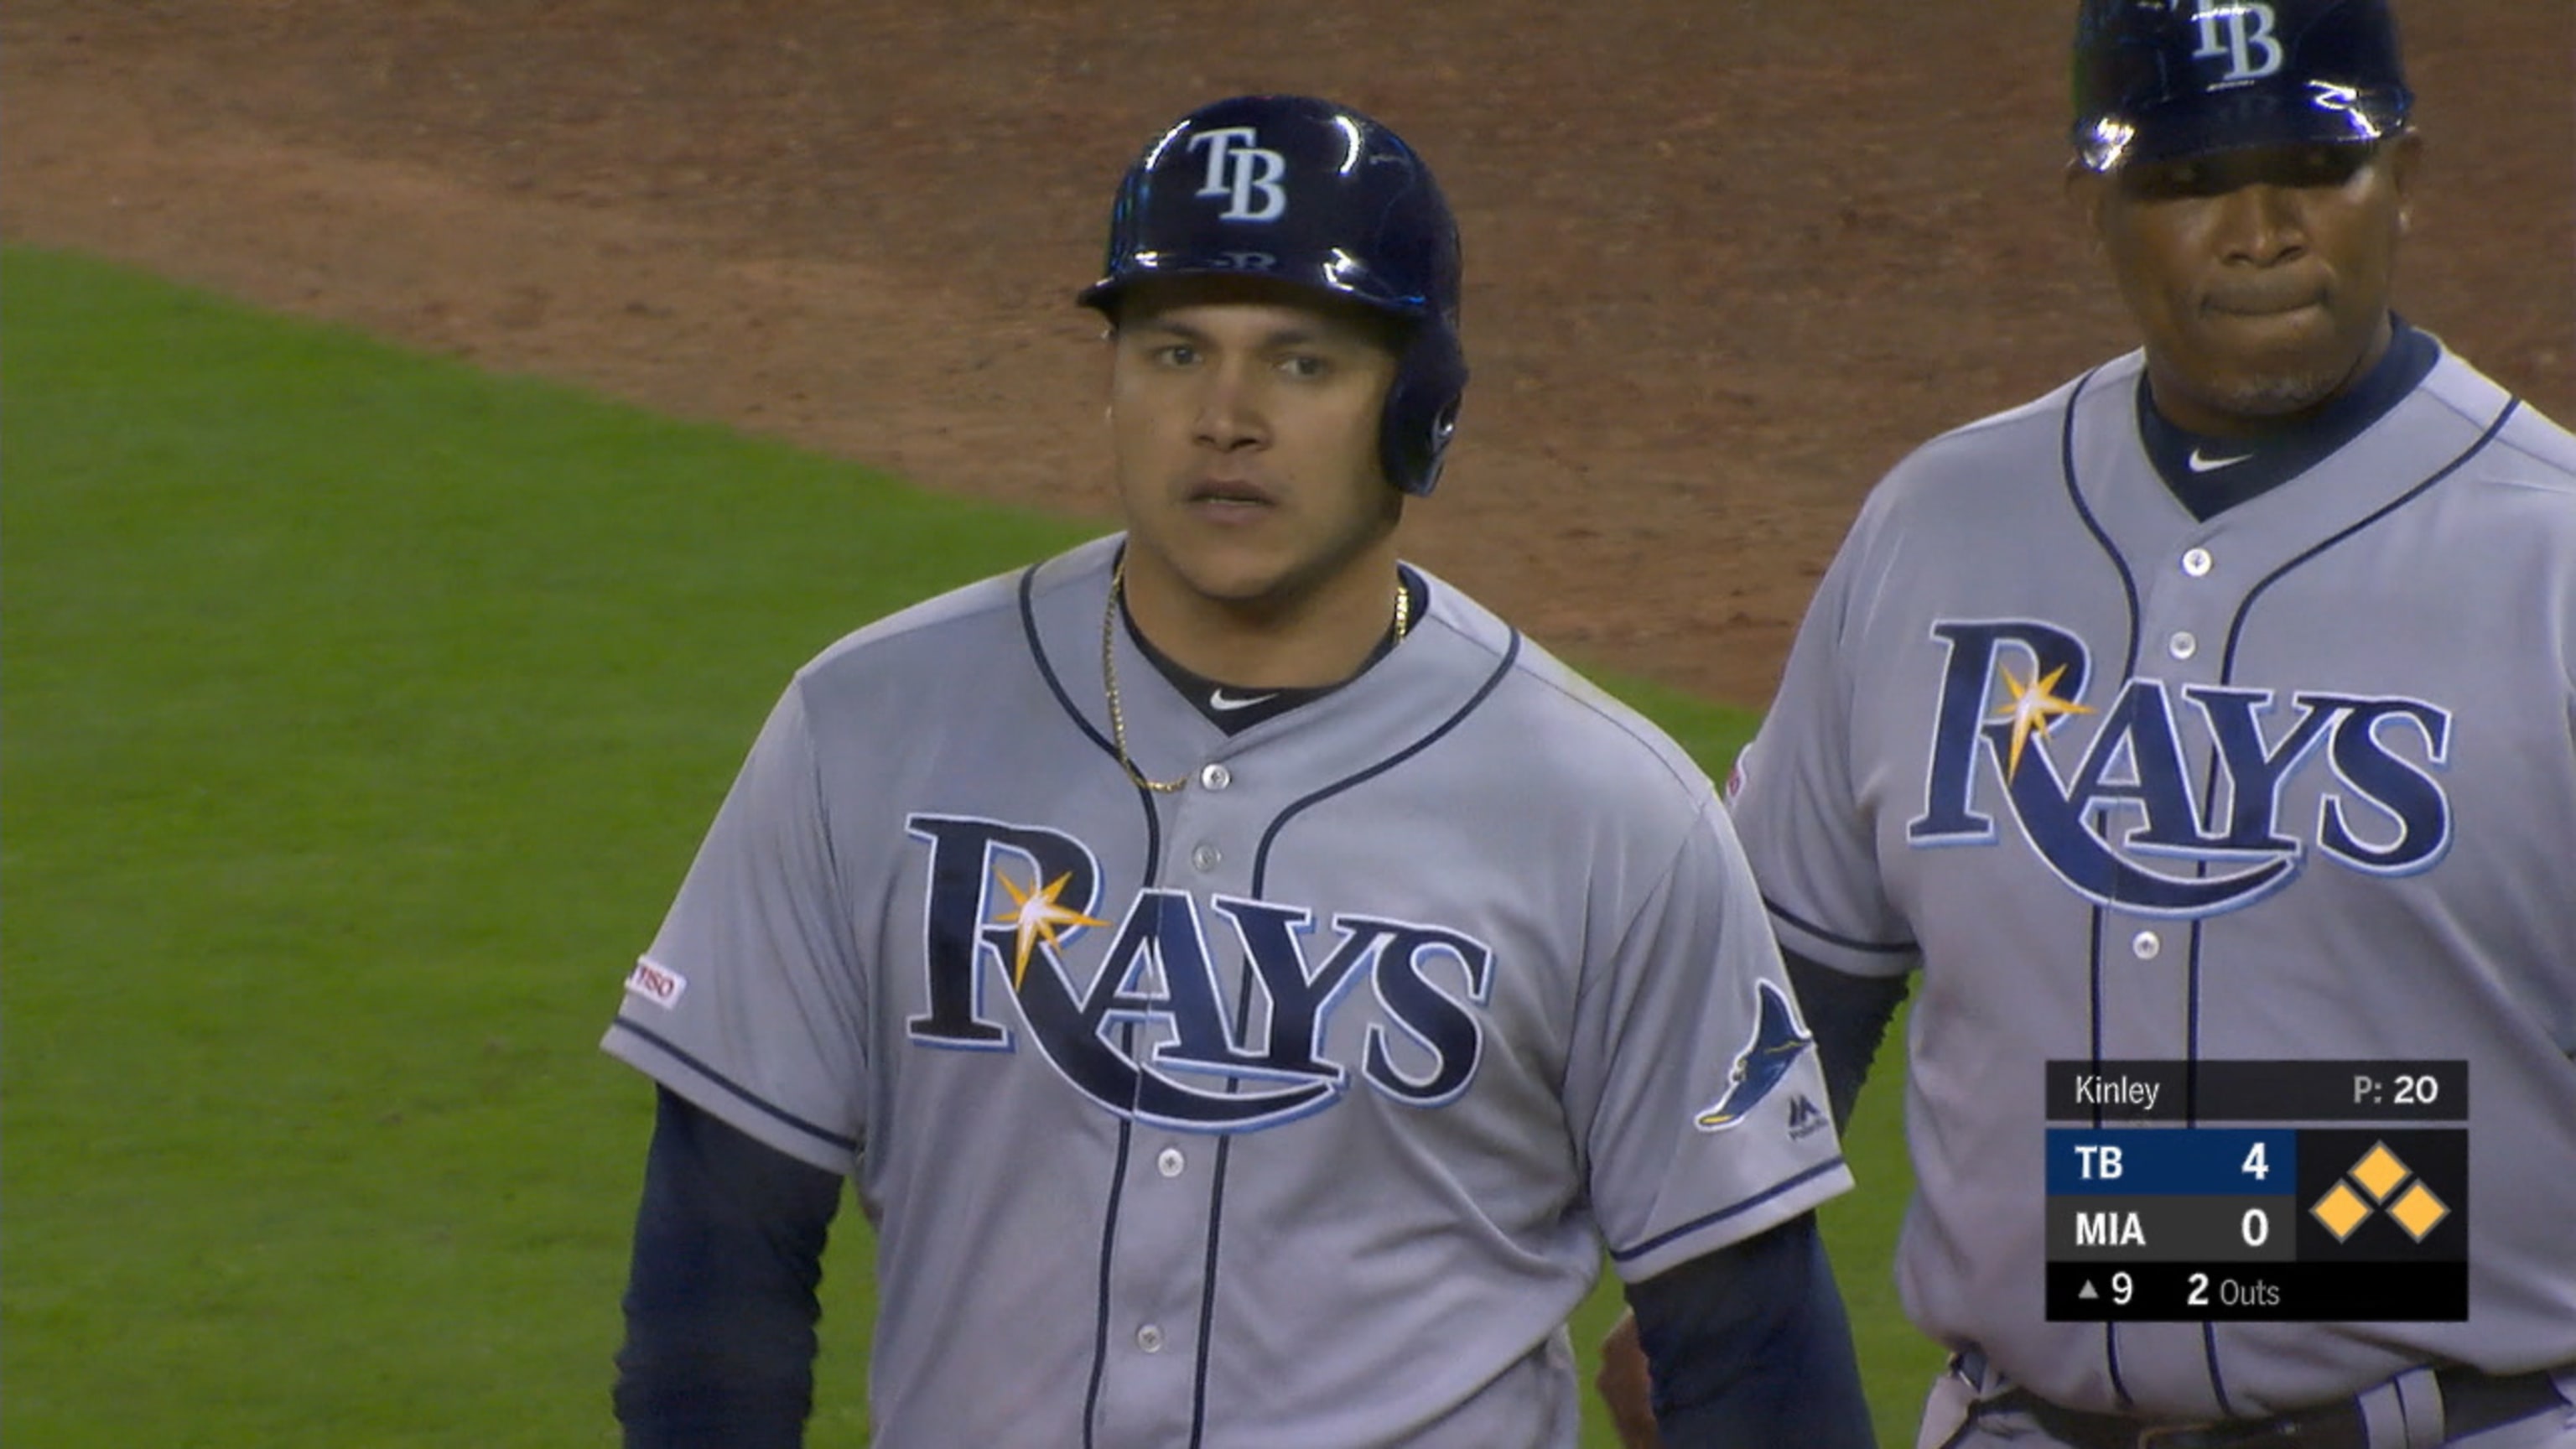 Is the Rays' 40-18 start legit or a fluke? These MLB analysts weigh in